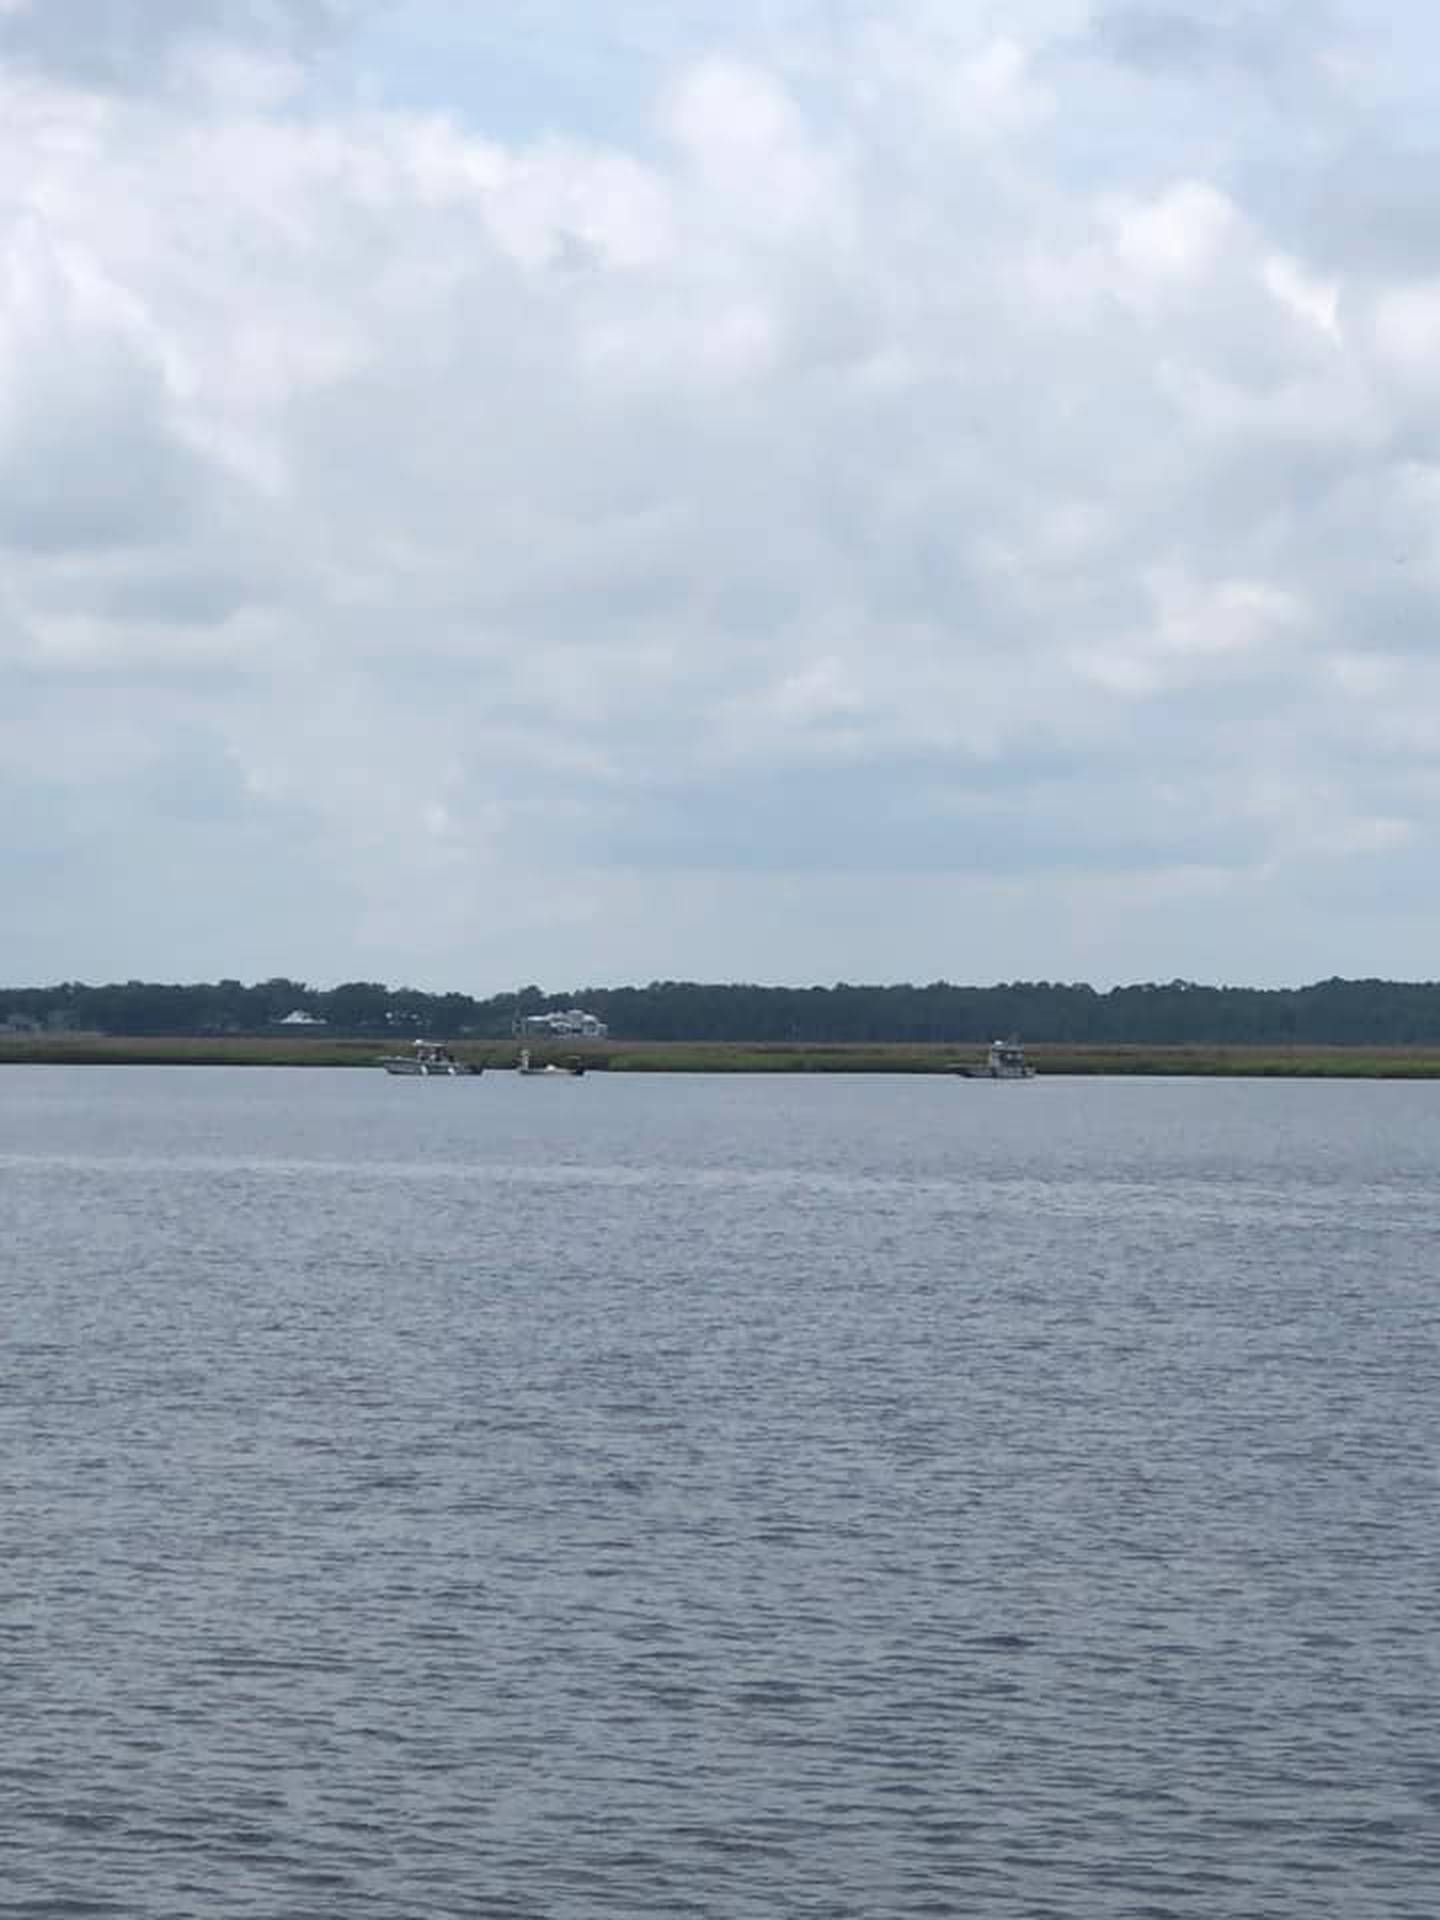 Crews responding to plane down in the St. Marys River on June 18, 2021 (Viewer photo)